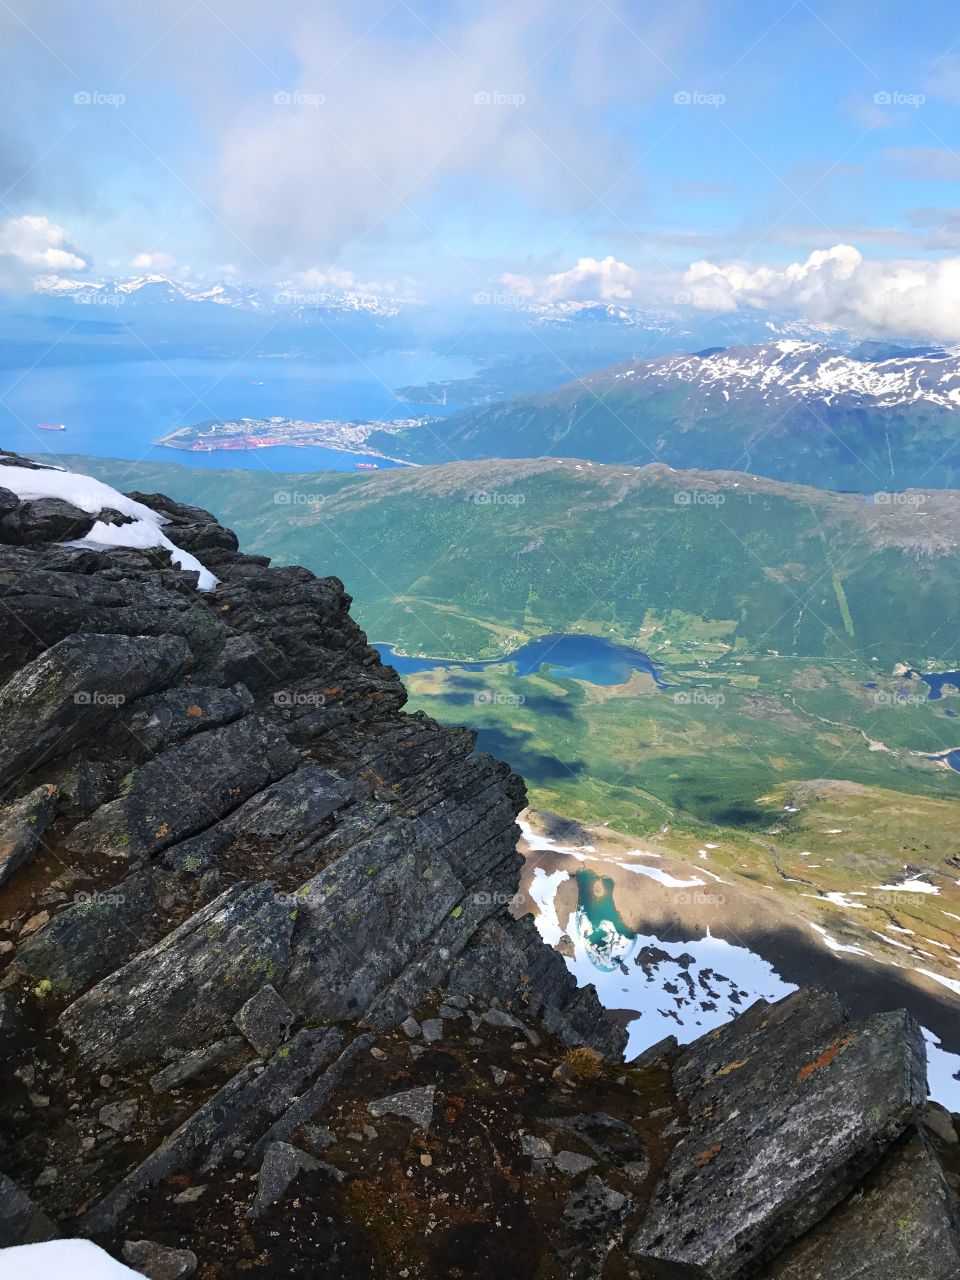 View from the mountain: The Sleeping Queen (Narvik, Norway)